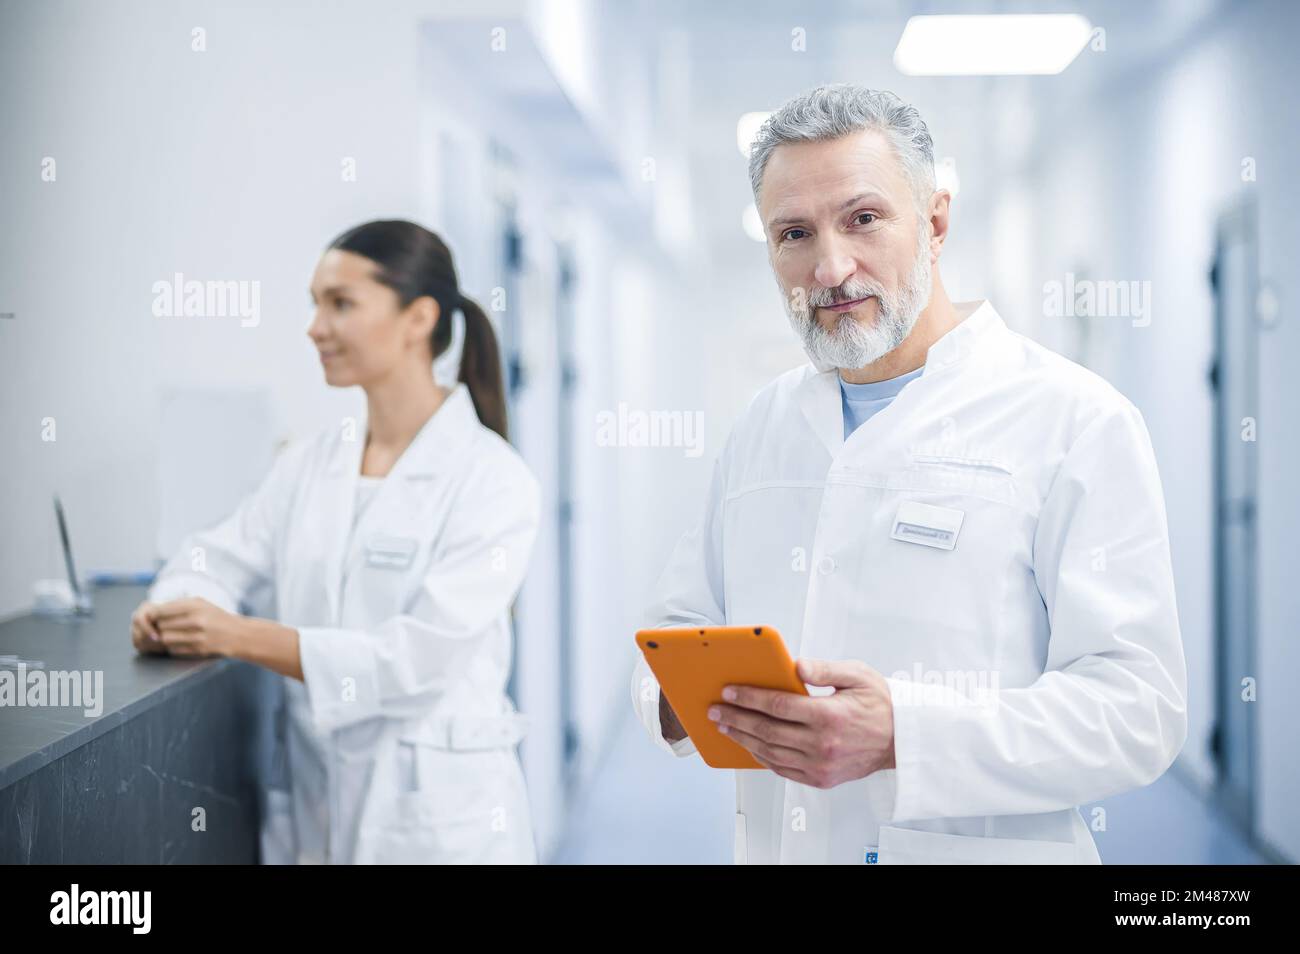 Two doctors talking in the hospital during the shift change Stock Photo